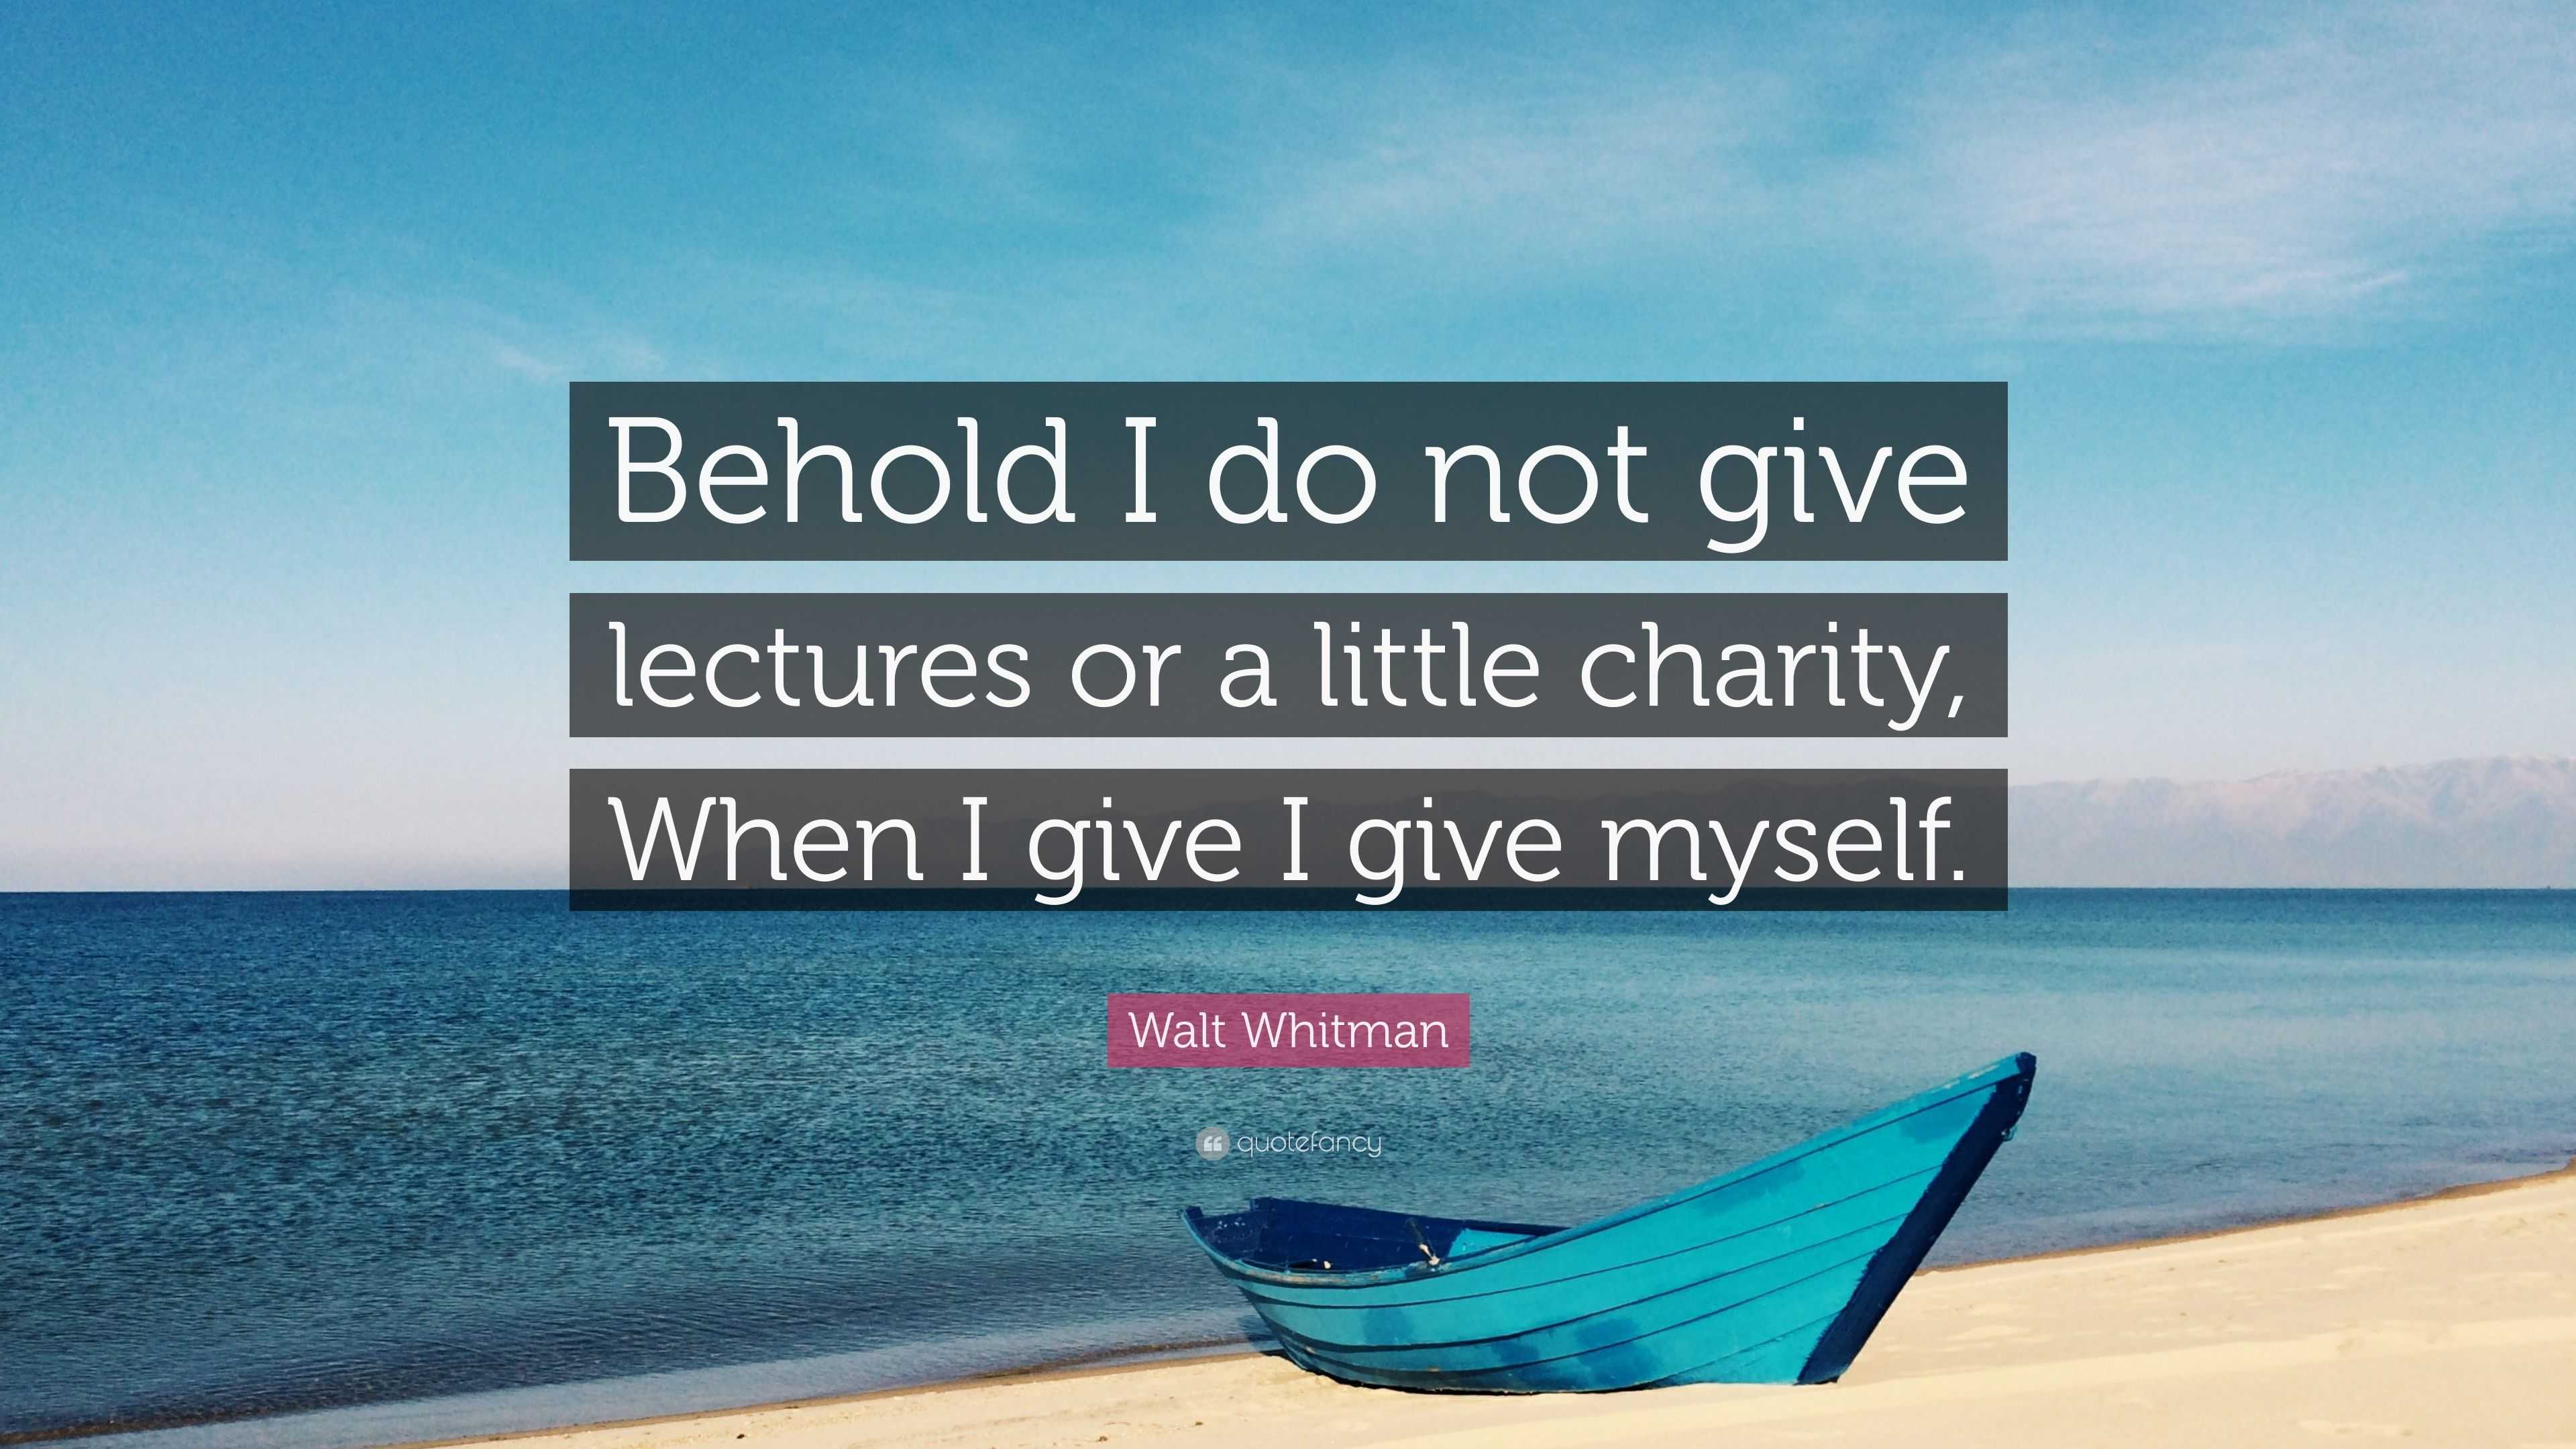 Walt Whitman Quote: “Behold I do not give lectures or a little charity ...